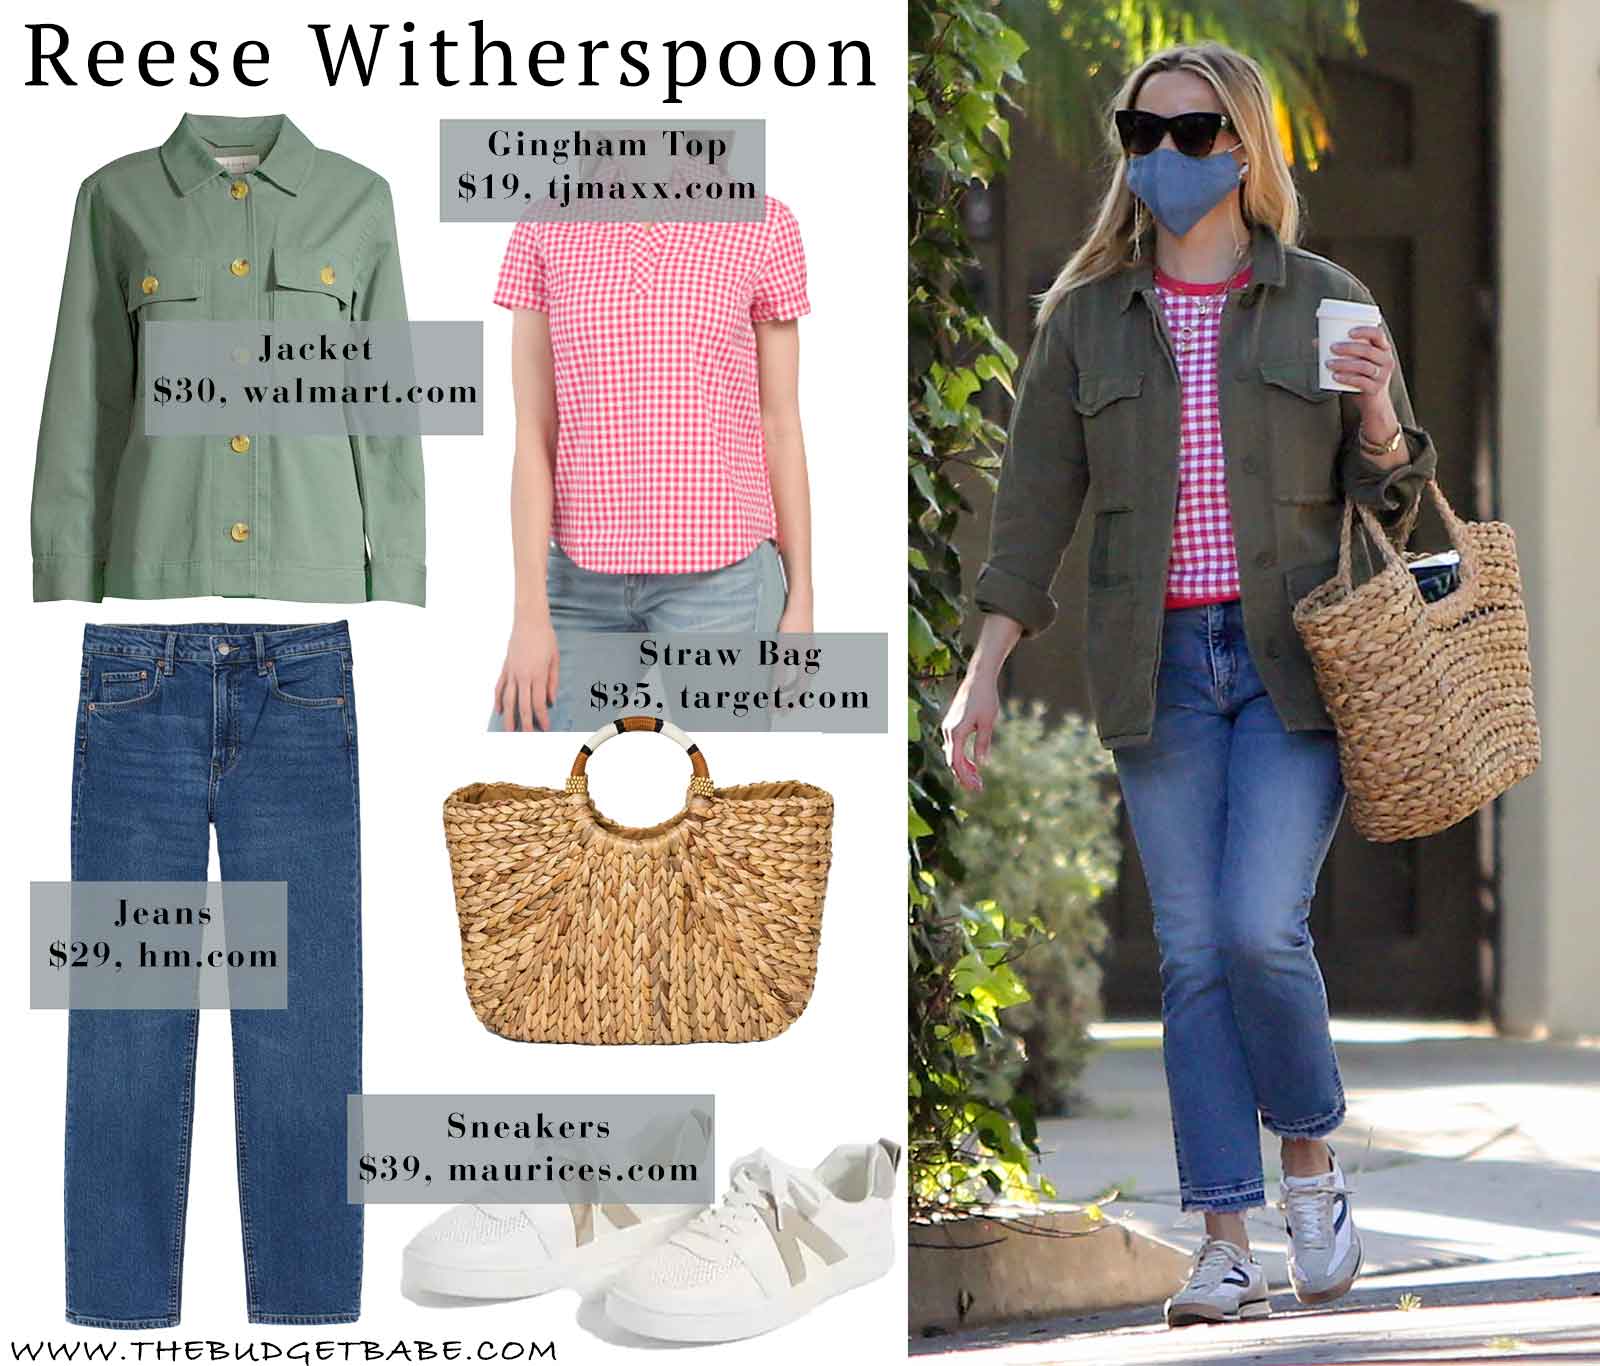 Reese Witherspoon gingham shirt and cargo jacket look for less